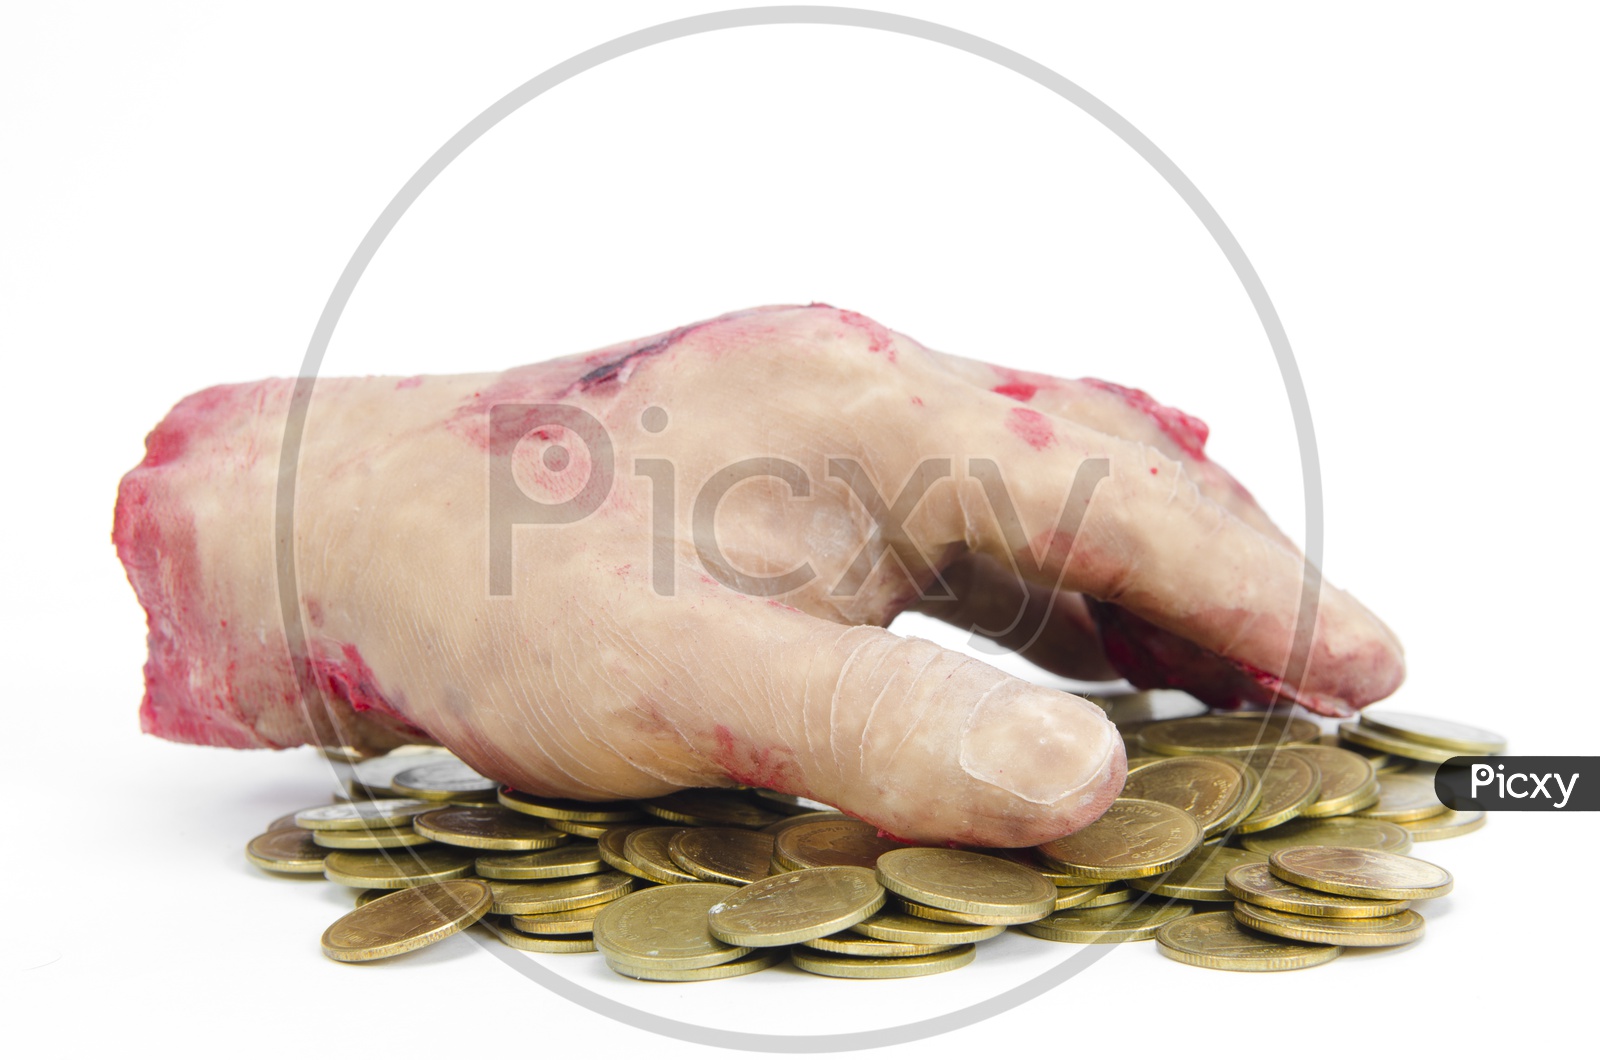 A Human Hand on the stack of coins